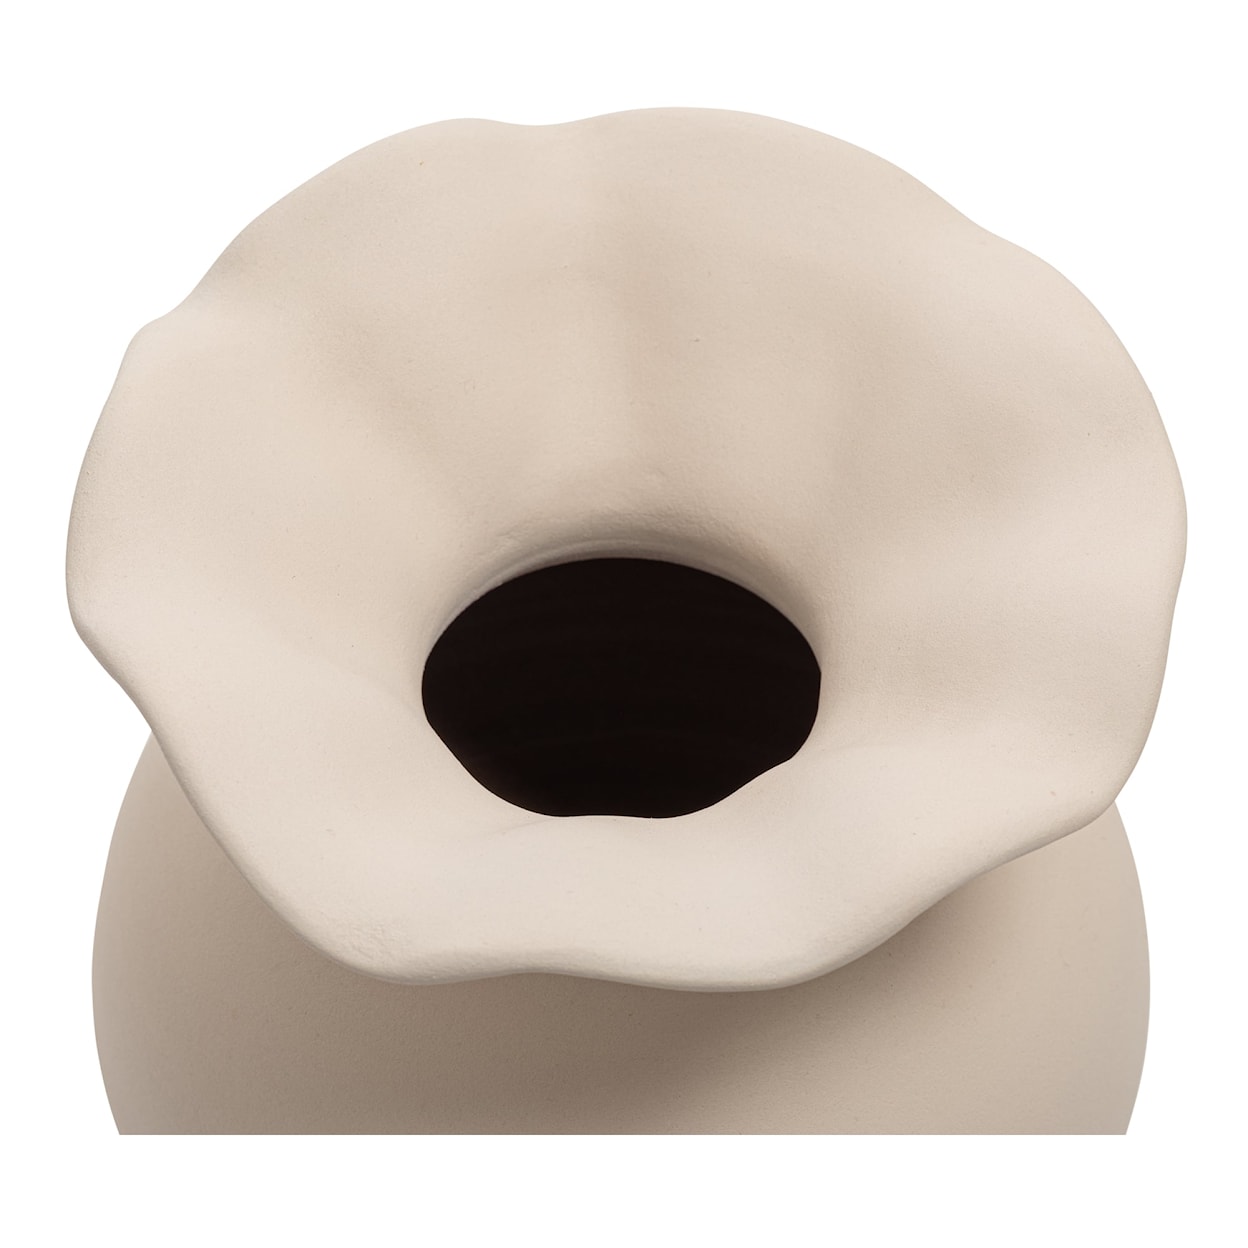 Moe's Home Collection Ruffle 12" Decorative Vessel